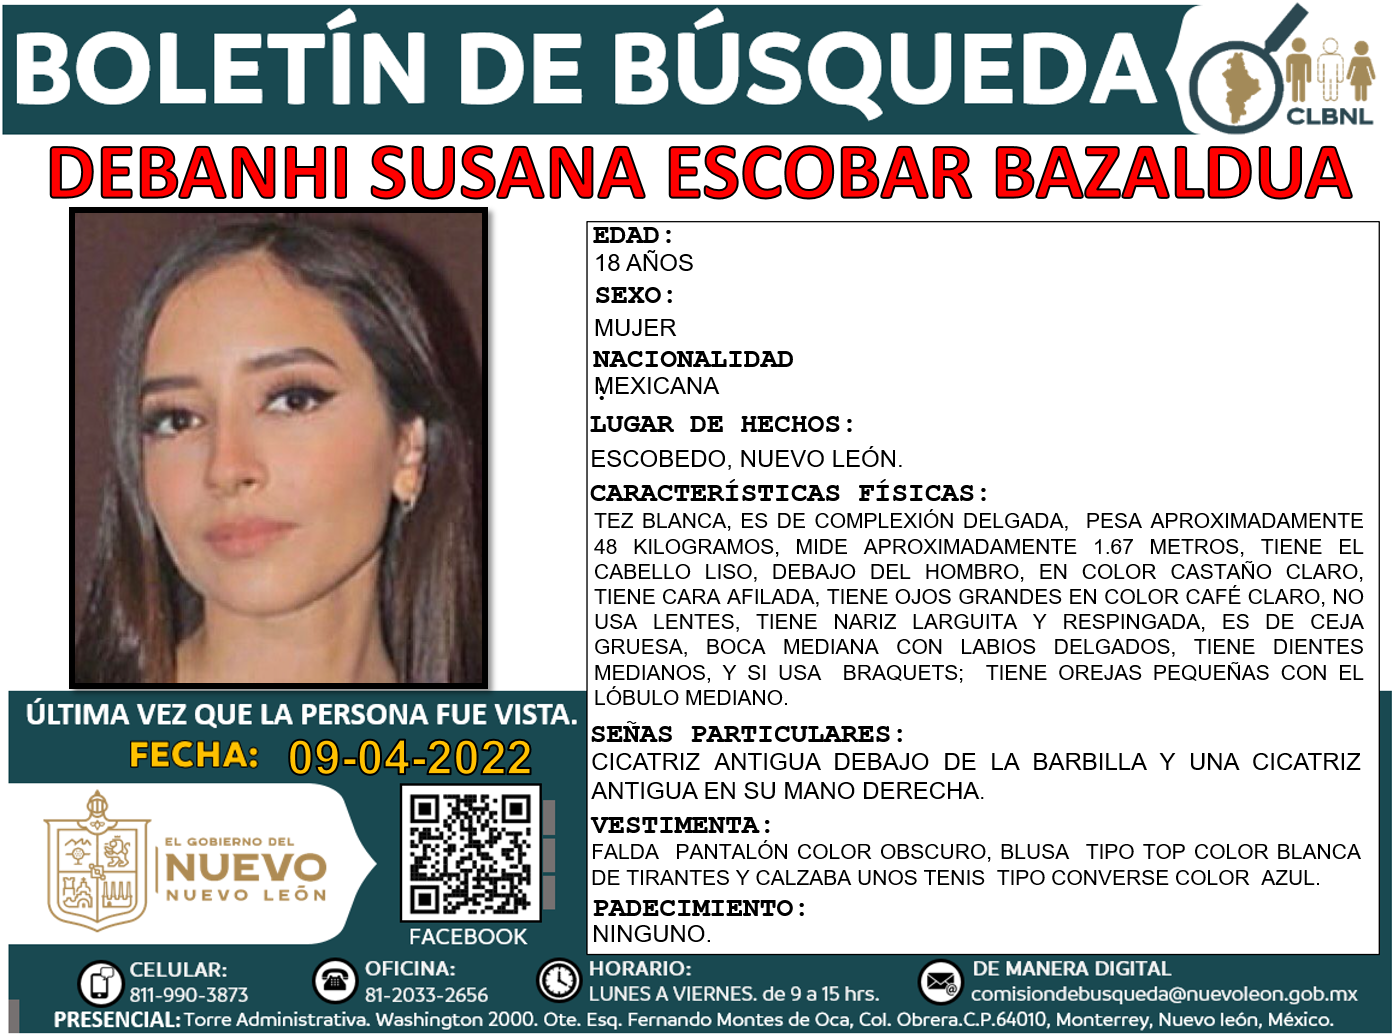 Relatives and authorities are looking for Debanhi Susana, 18, who disappeared in Nuevo León (Photo: Local Commission for the Search for Persons)